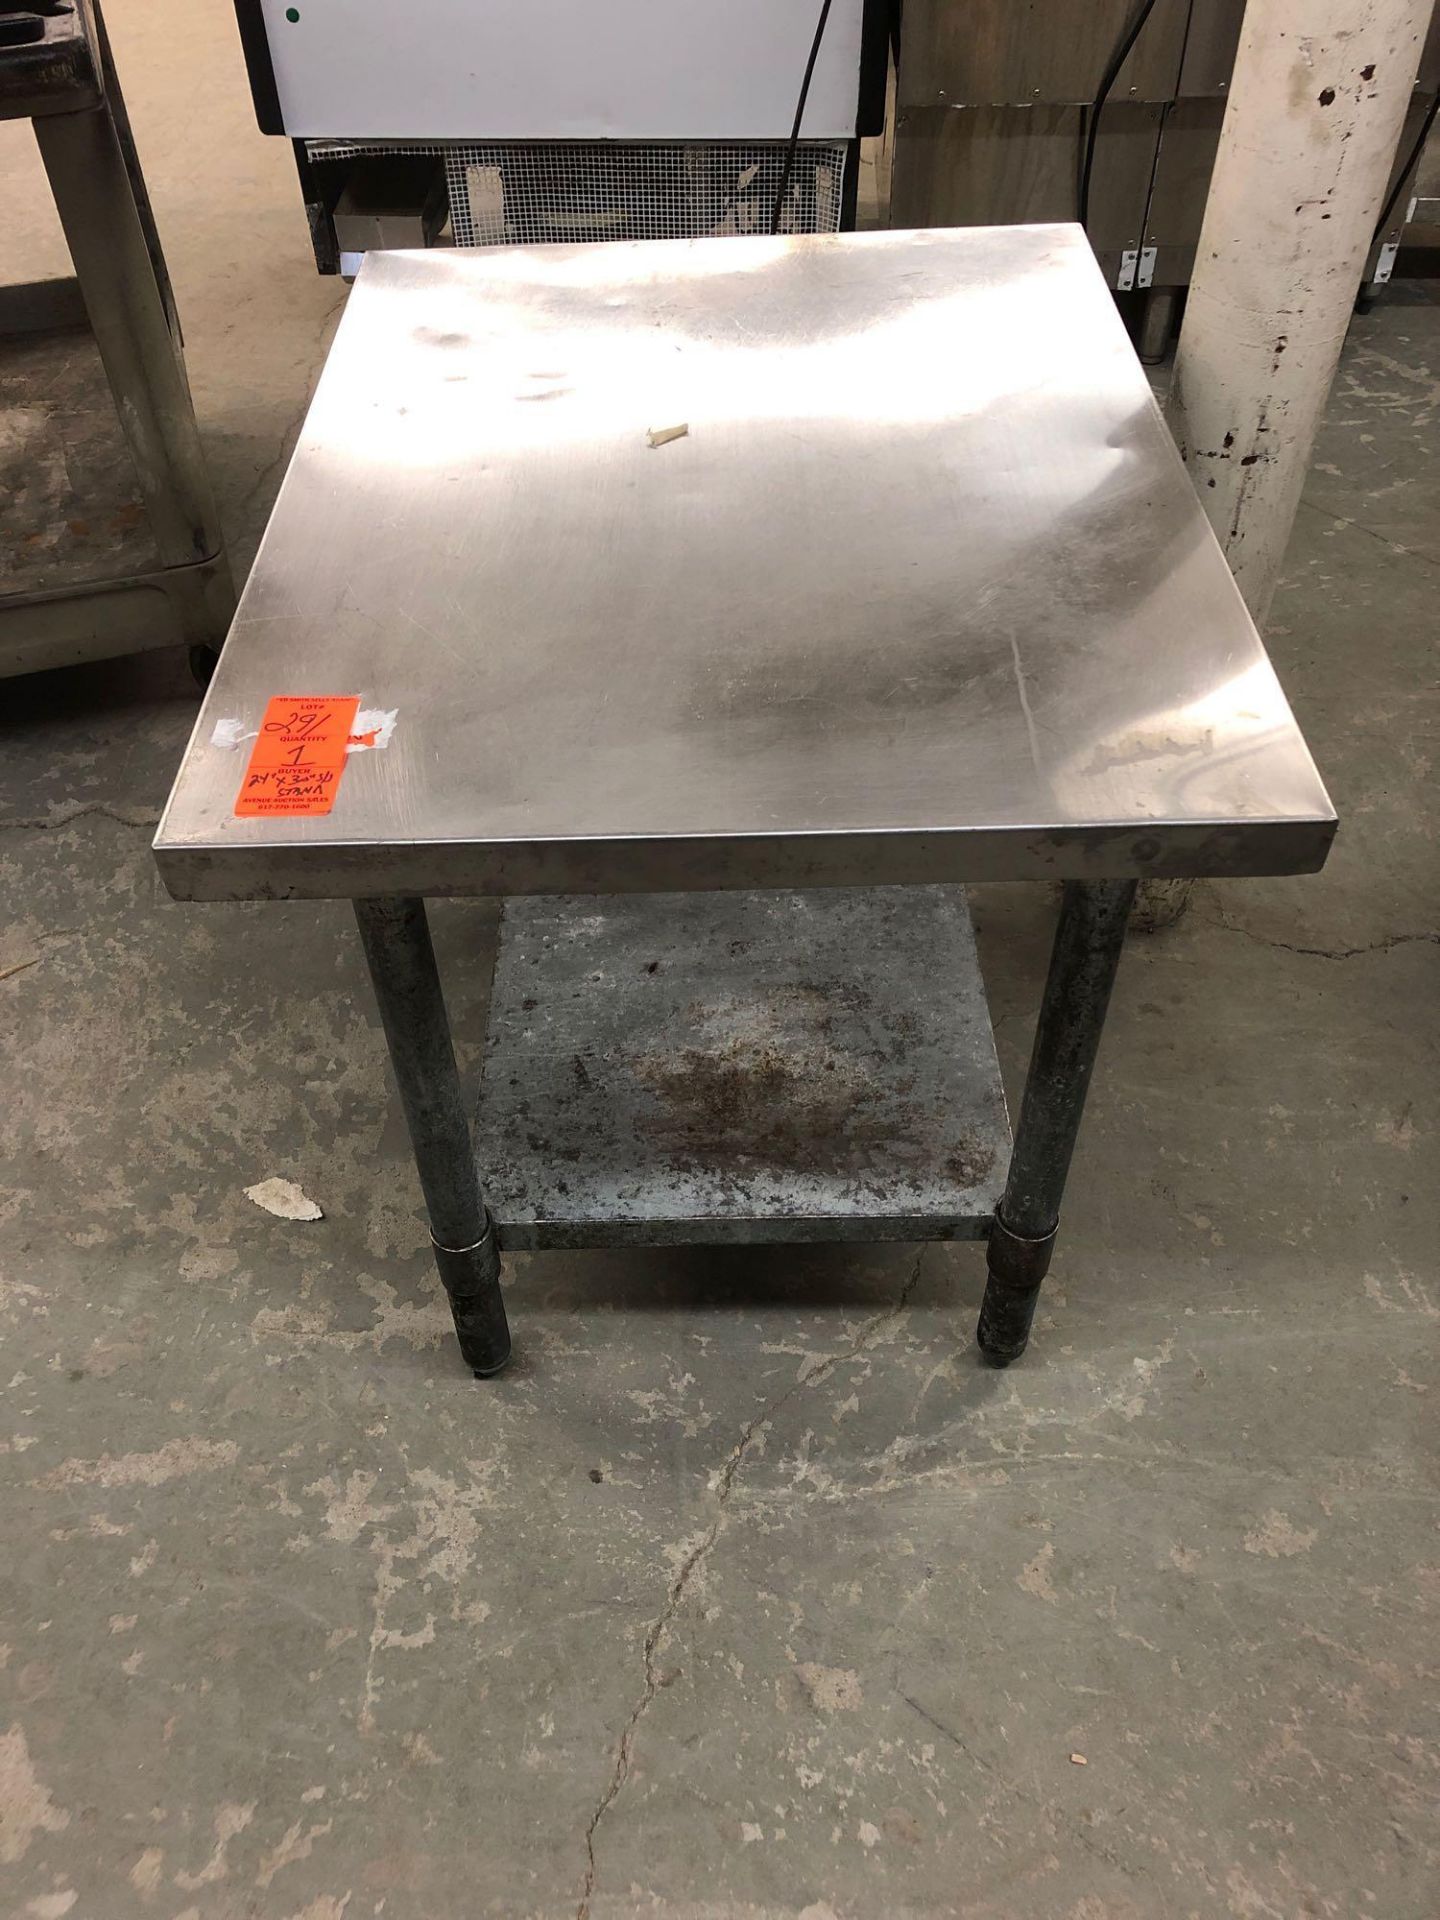 24” x 30” stainless top stand